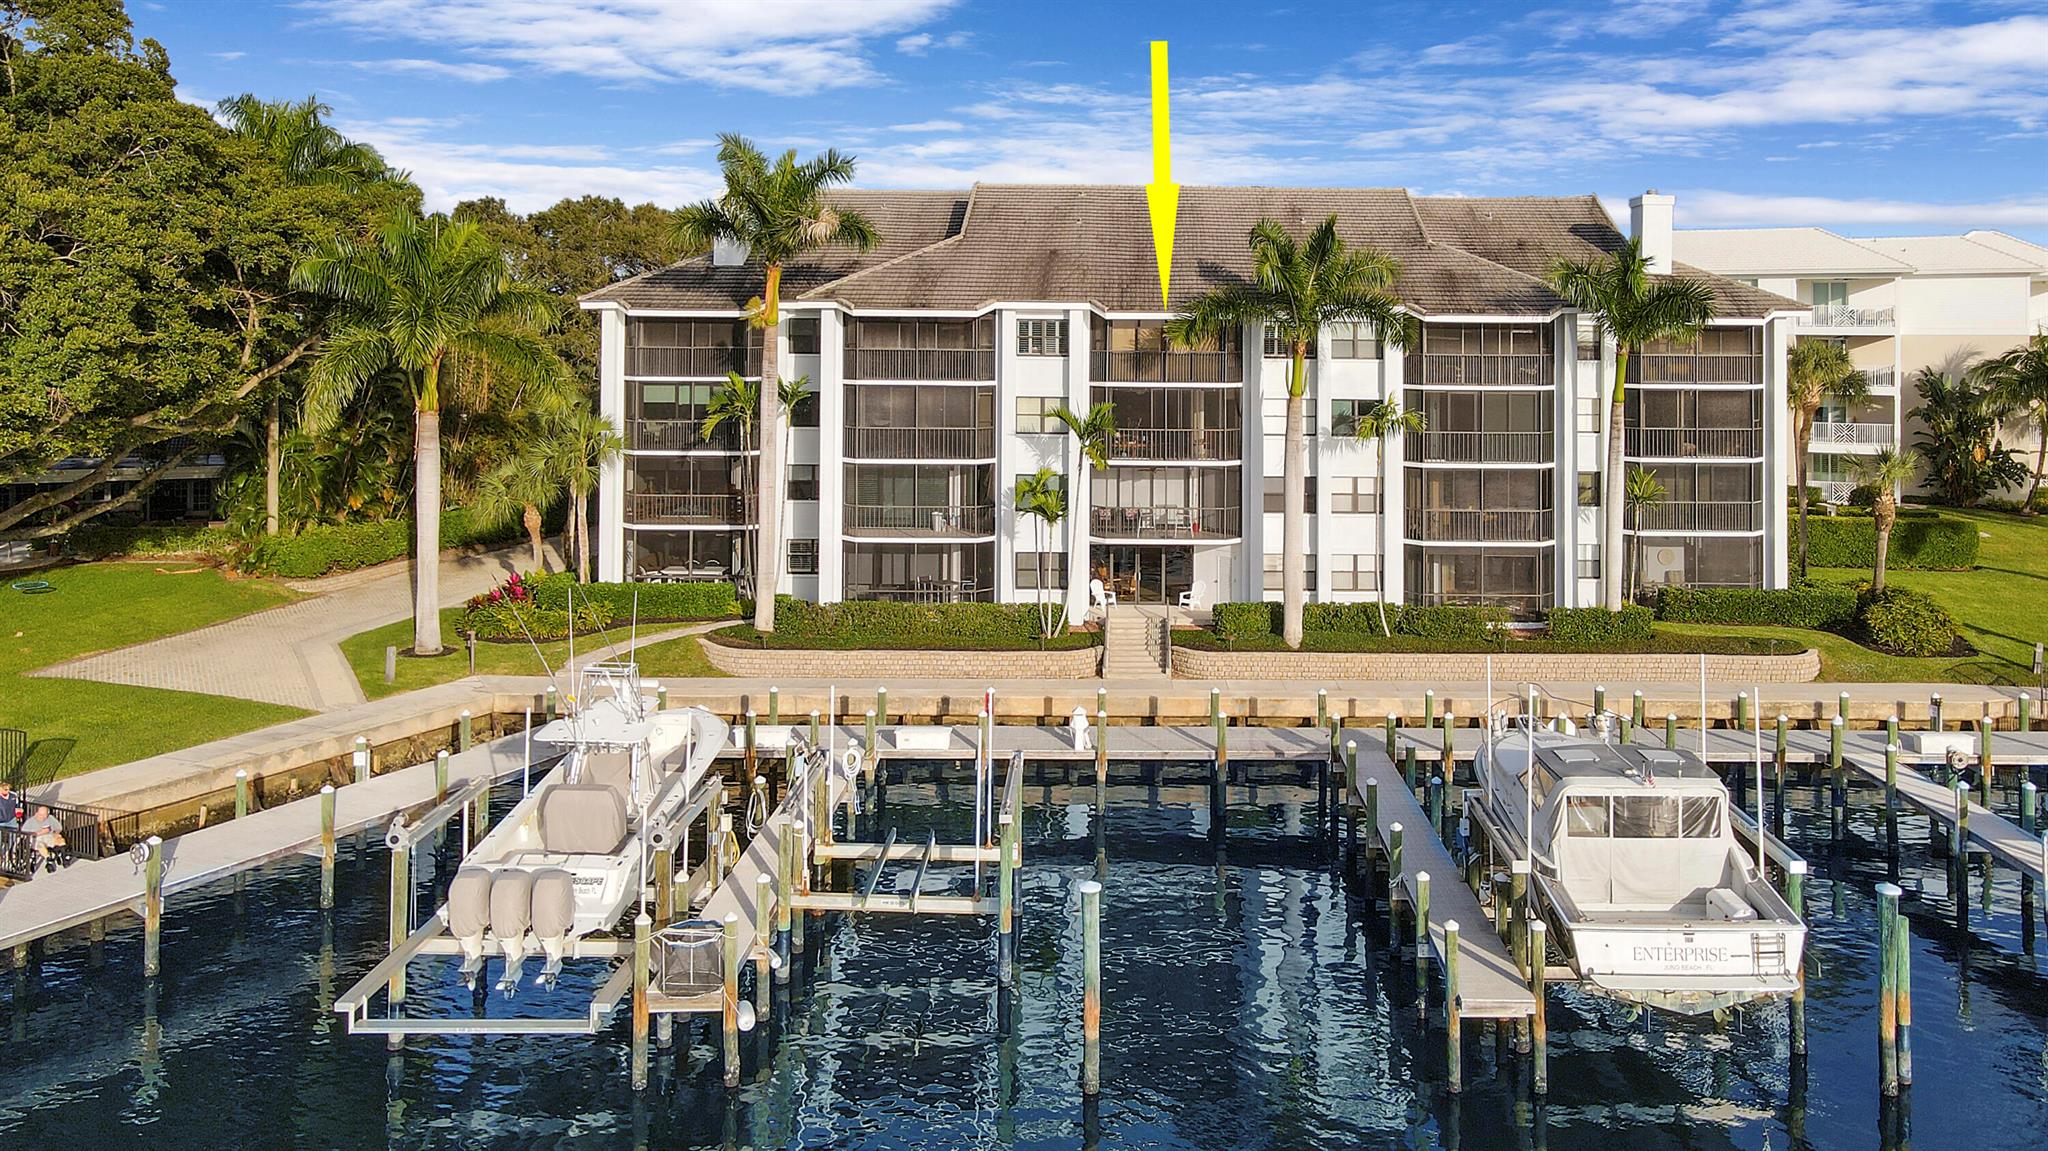 A Boat Owners Dream!! Gorgeous top floor condo located on the intracoastal in Bay Colony. Includes a private marina, resort style pool, hot tub, fitness center, clubhouse, tennis courts, etc. The unit boasts direct intracoastal & marina views with a private deeded 50ft boat slip & no fixed bridges.  The amazing layout showcases 4 glass sliders in the living area to view the stunning panoramic sunsets & a spiral staircase leading to a large loft /flex space/3rd bedroom, with vaulted ceilings & plentiful natural light all day long. Beautiful hardwoods in main living area & new tile floors in the master bed & bath, stainless appliances & an open kitchen for entertaining. All of this is just a bonus on top of the central location, being minutes to Juno Beach, restaurants & shopping!